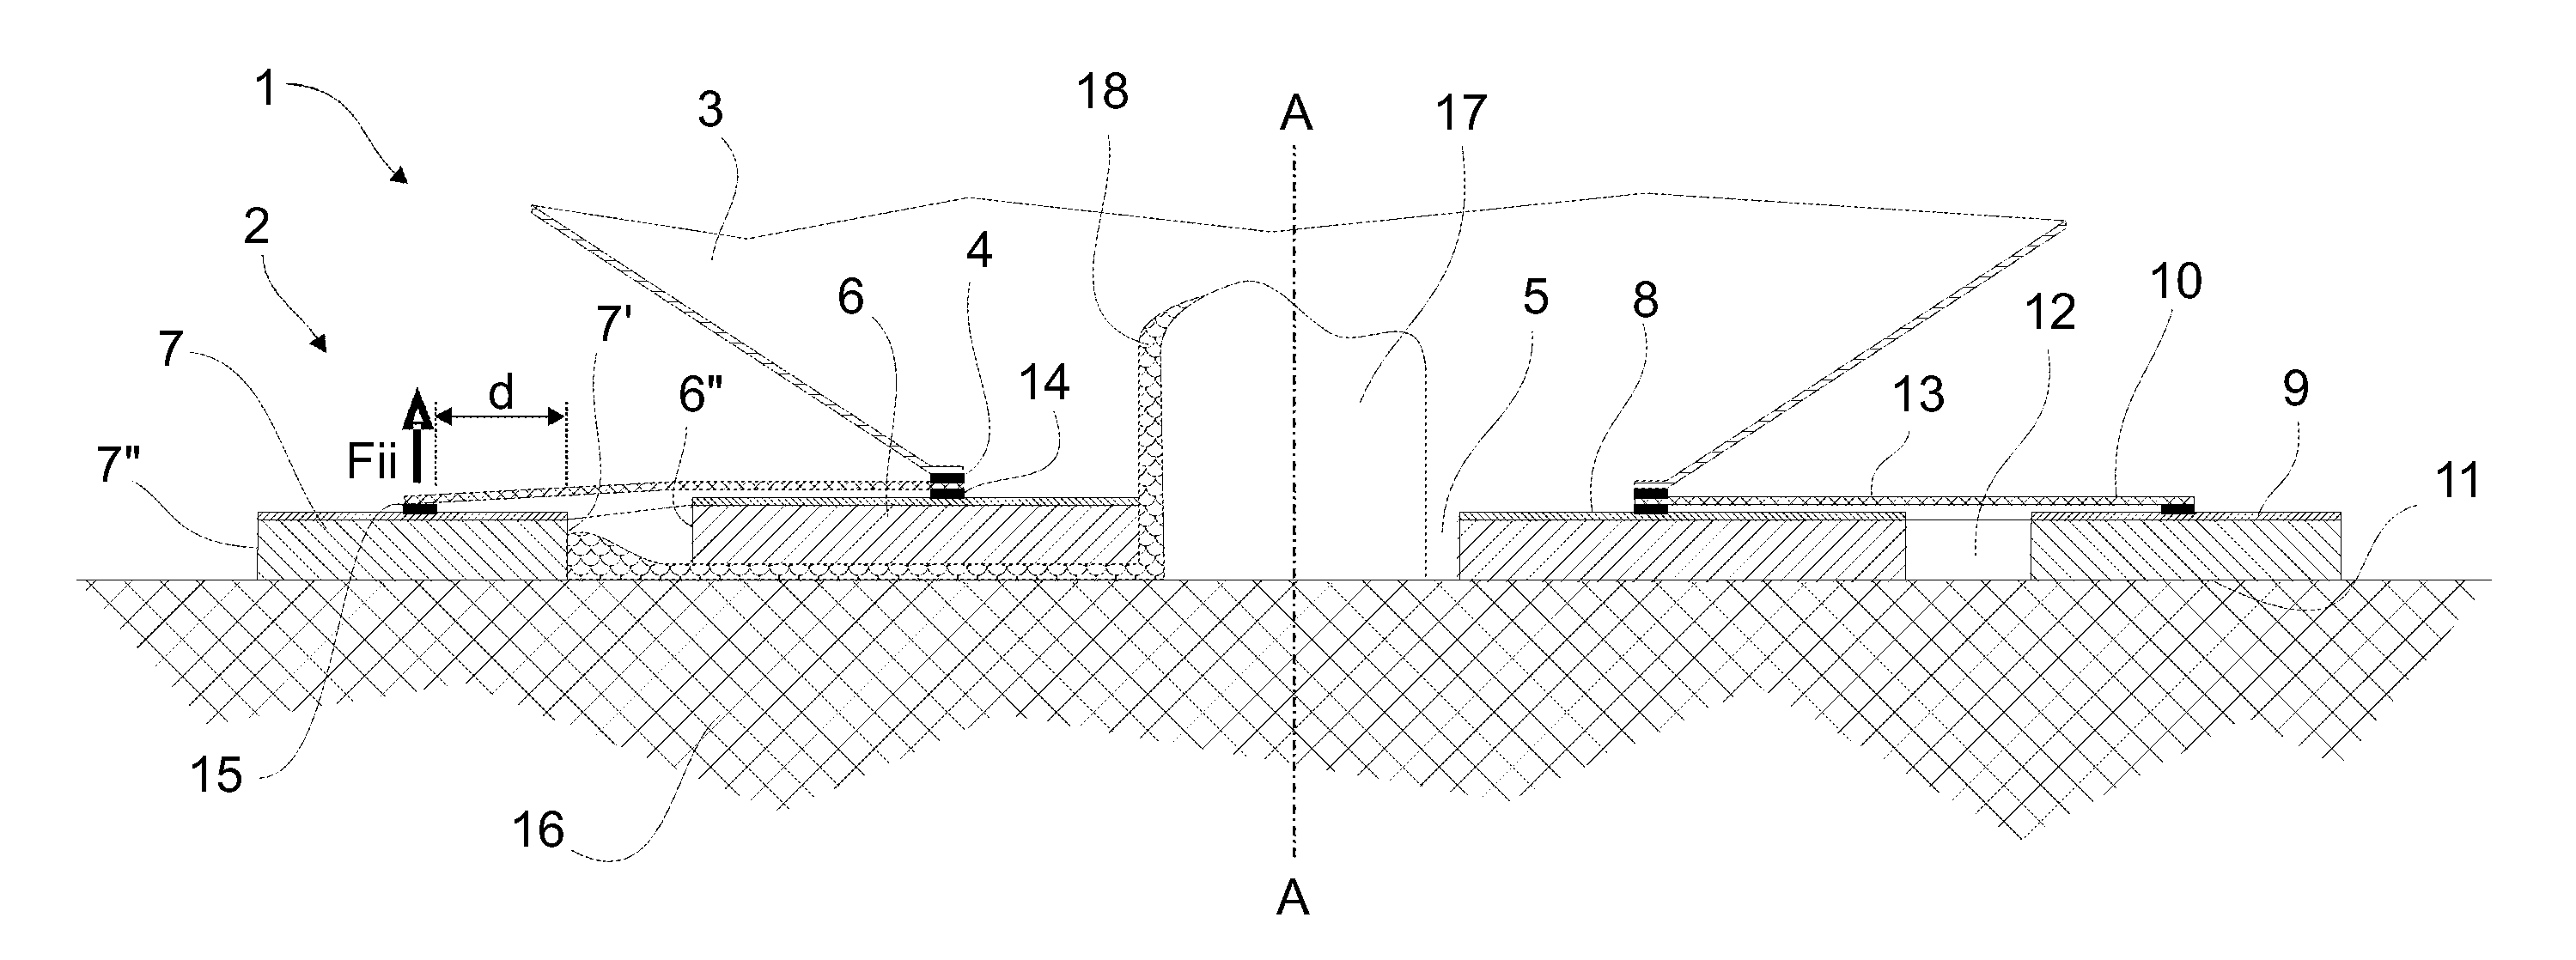 Adhesive wafer for use in a collecting device